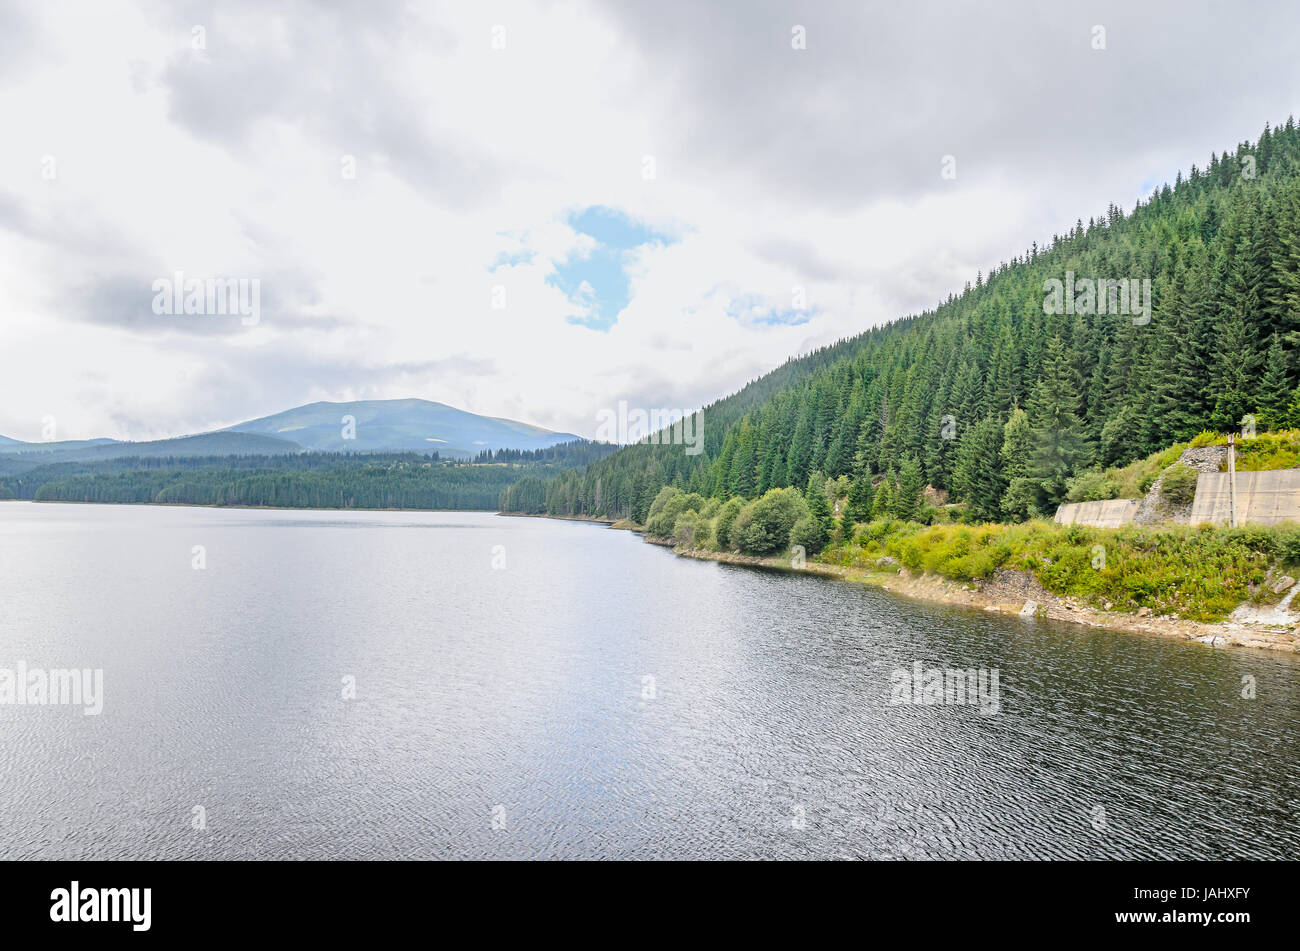 The dam and lake Oasa, river Sebes, pine forests, Sureanu Mountains. Stock Photo